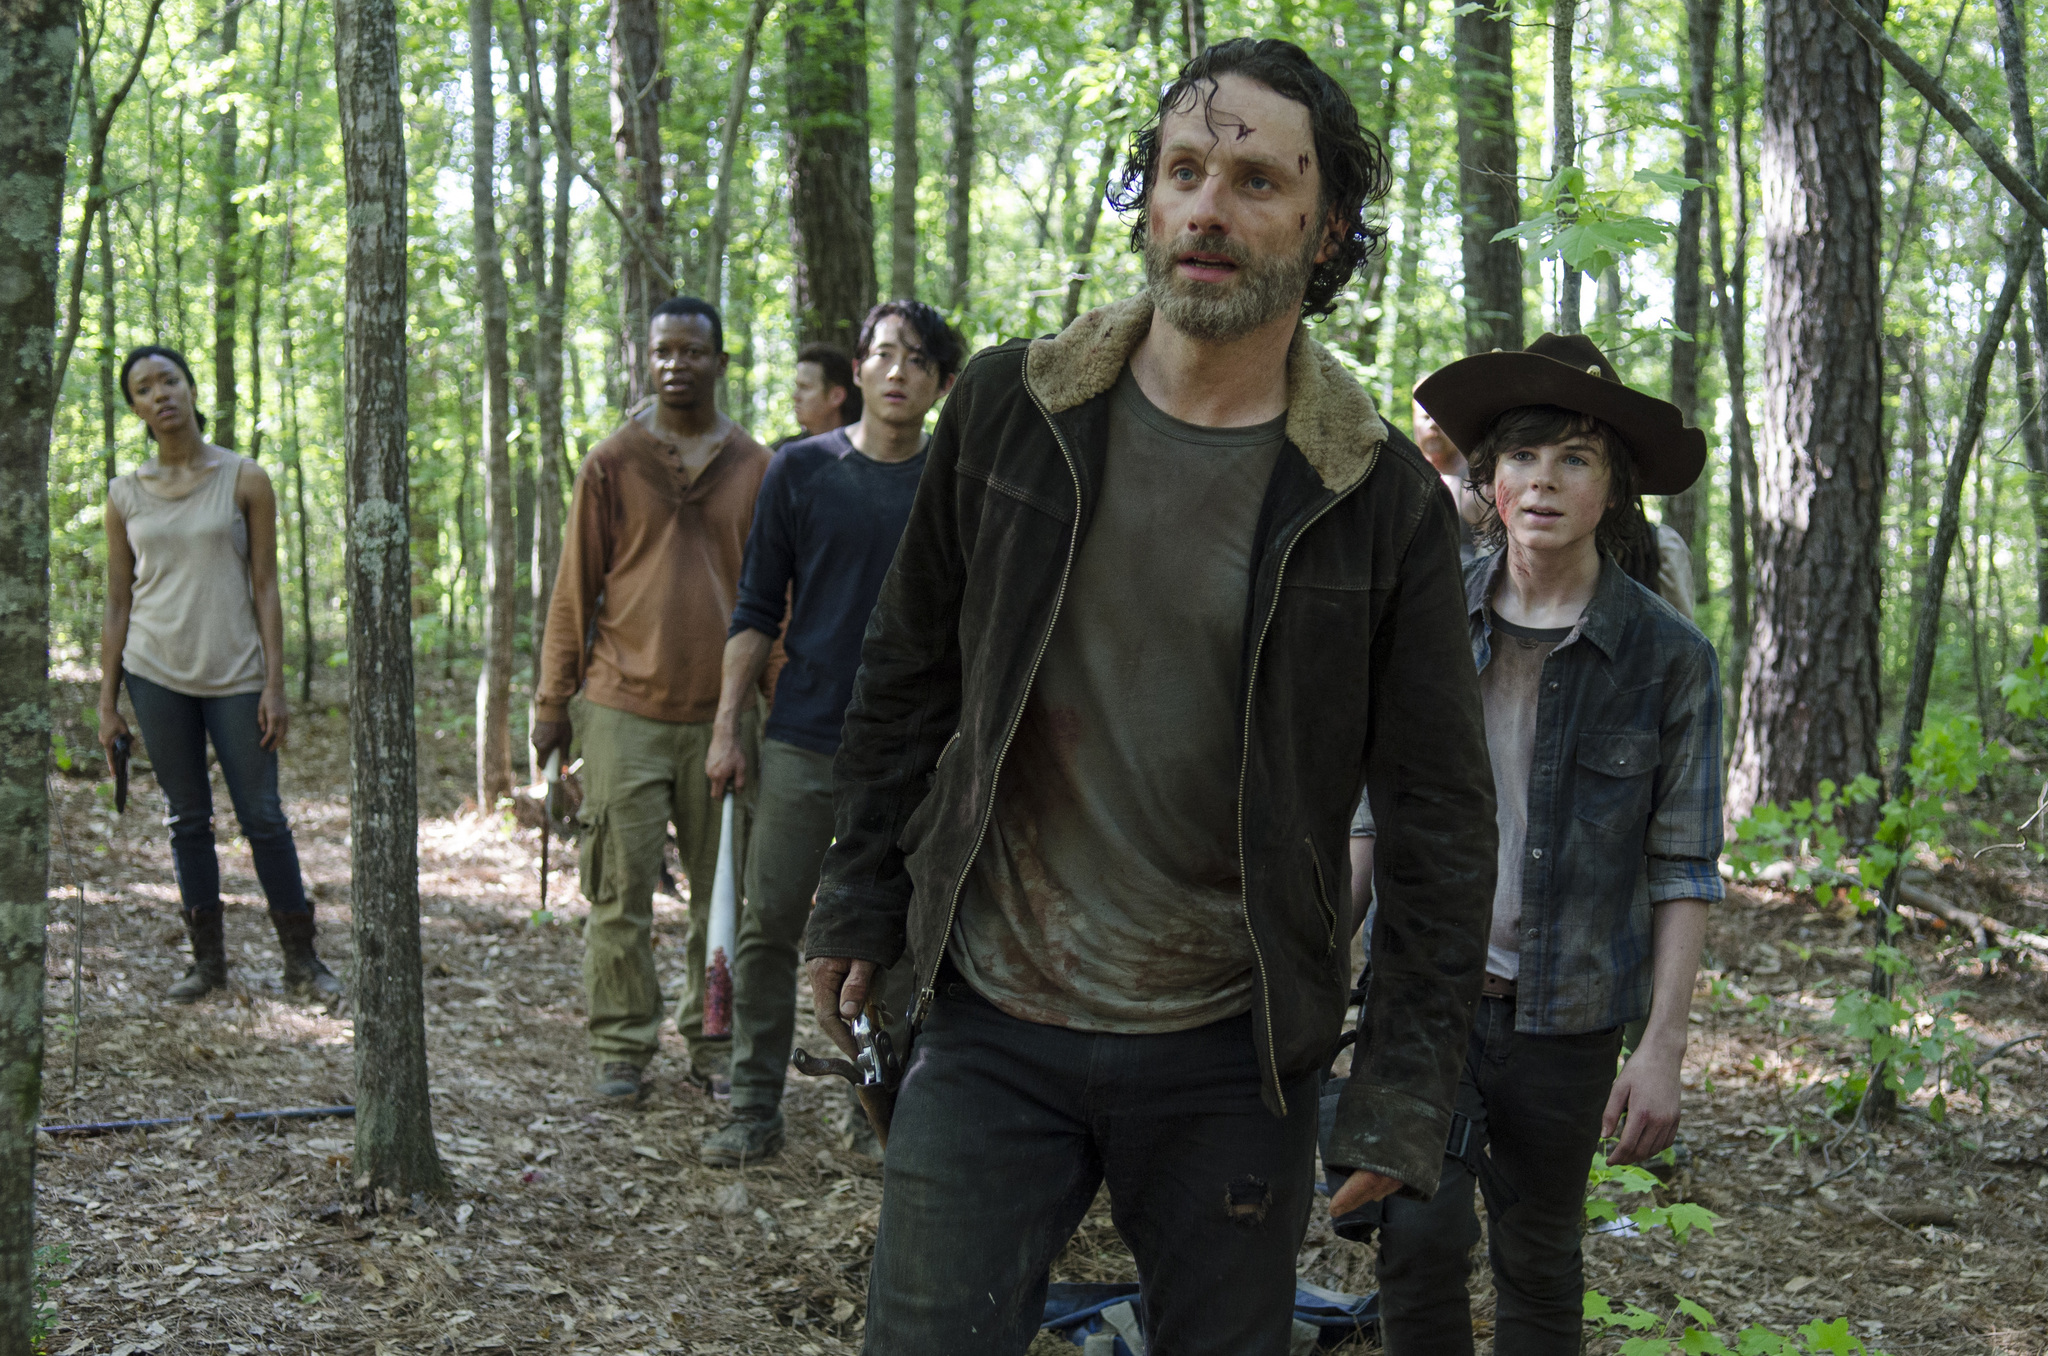 Only a True Movie Nerd Can Get 15/15 on This Movie Quotes Quiz. Can You? Rick Grimes, The Walking Dead